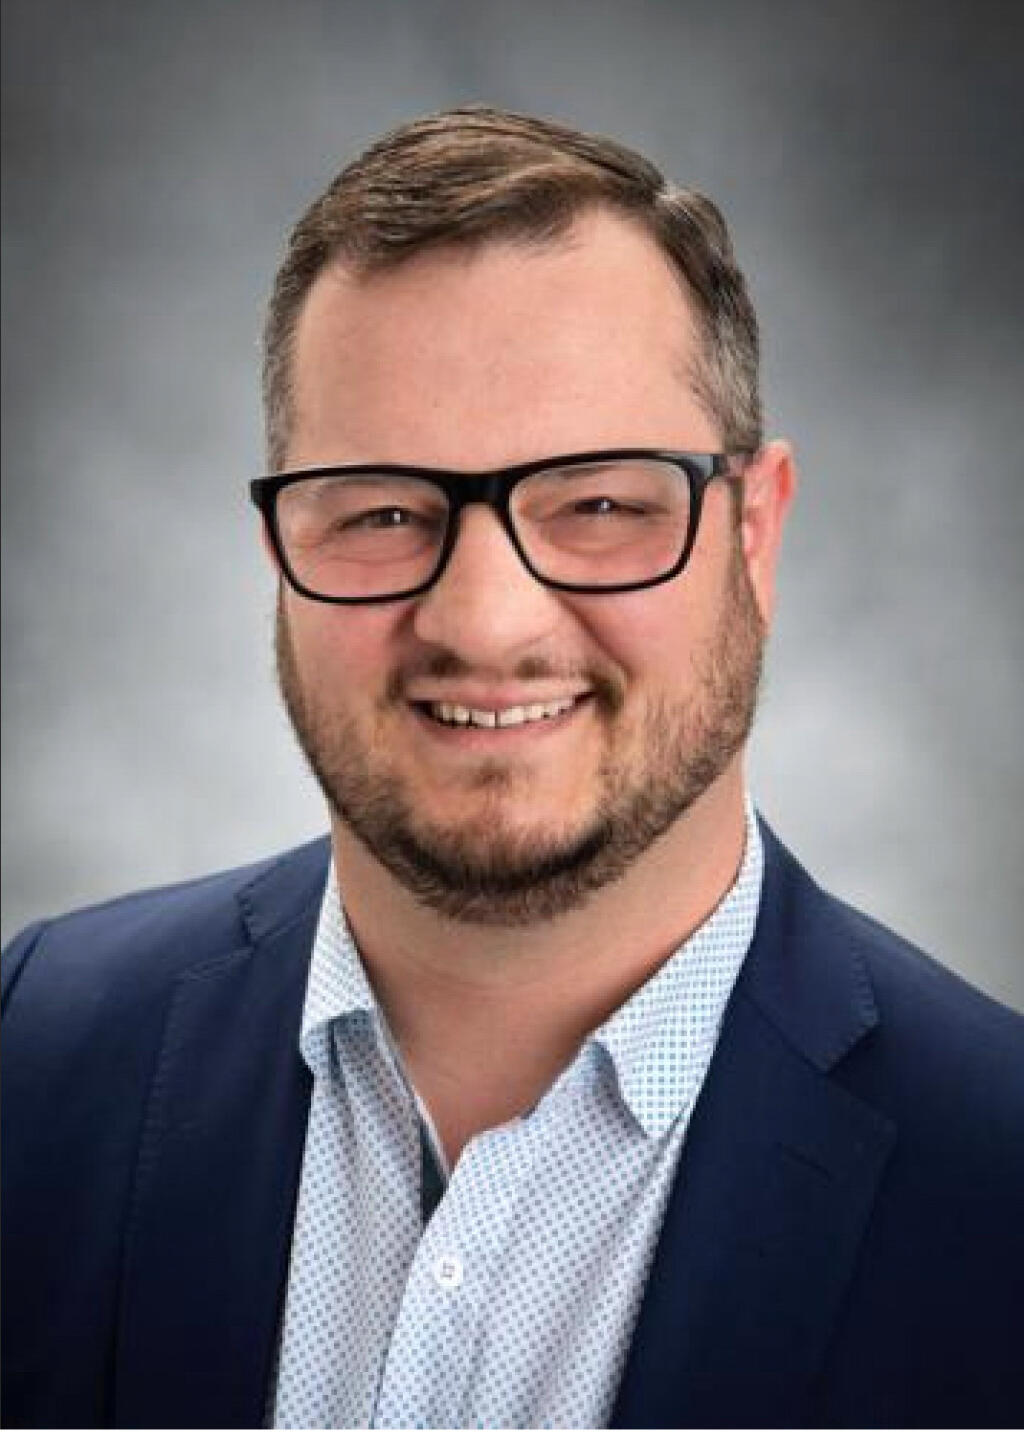 Eli Weinzveg, 38, a director of college pathways in North Bay counties, is a 2023 North Bay Business Journal Forty Under 40 Award winner. The winners will be recognized Tuesday, April 25 at an event from four to 6 p.m. at Saralee and Richards Barn at the Sonoma County Fairgrounds.